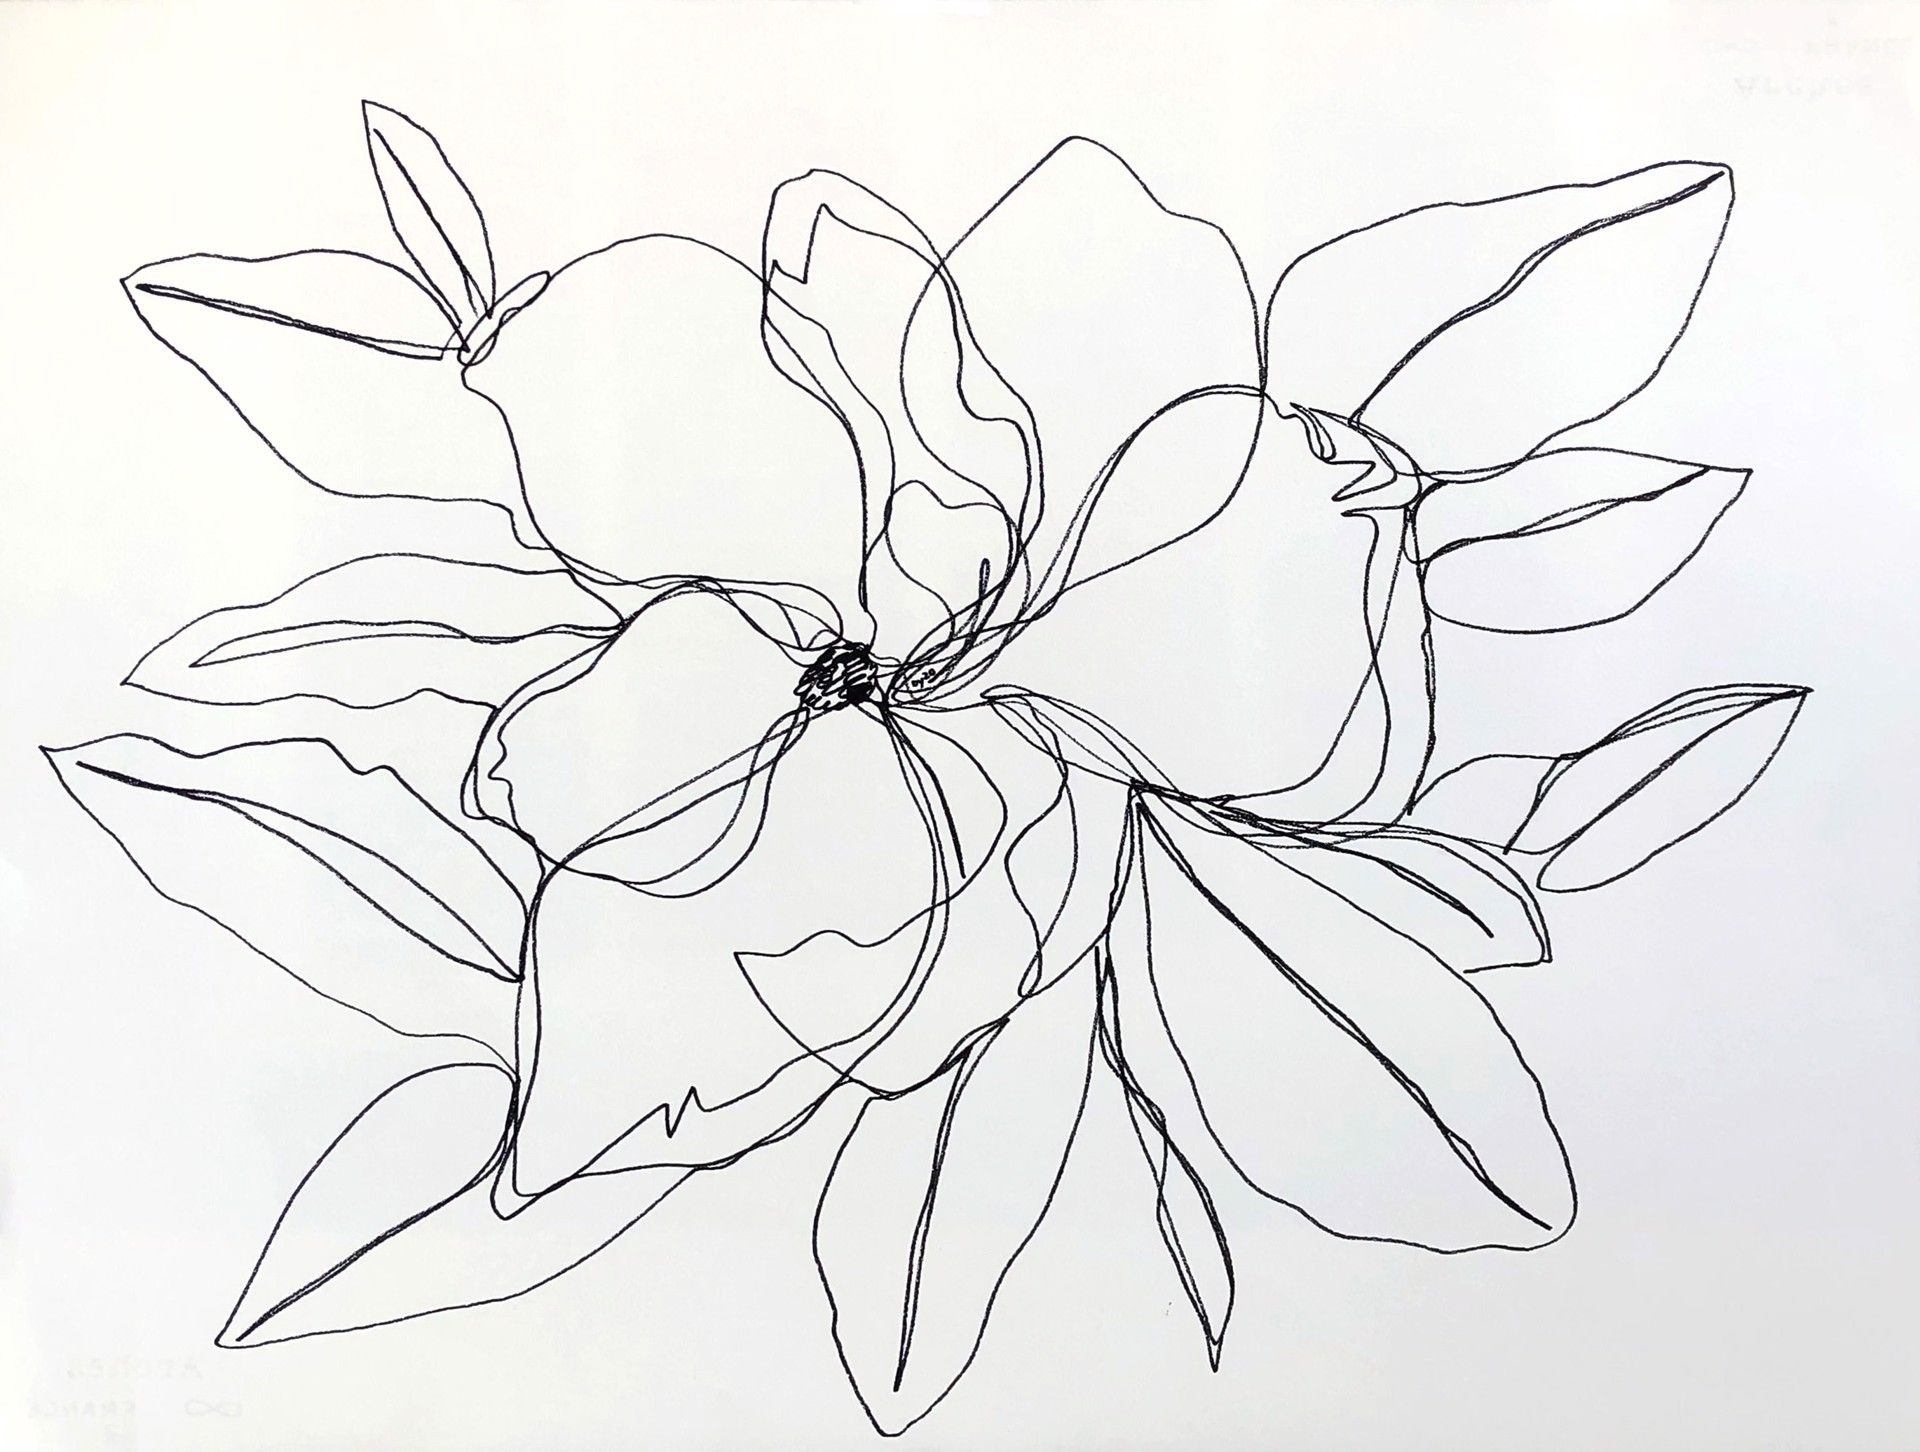 Floral in Lines IV by Dustin Young